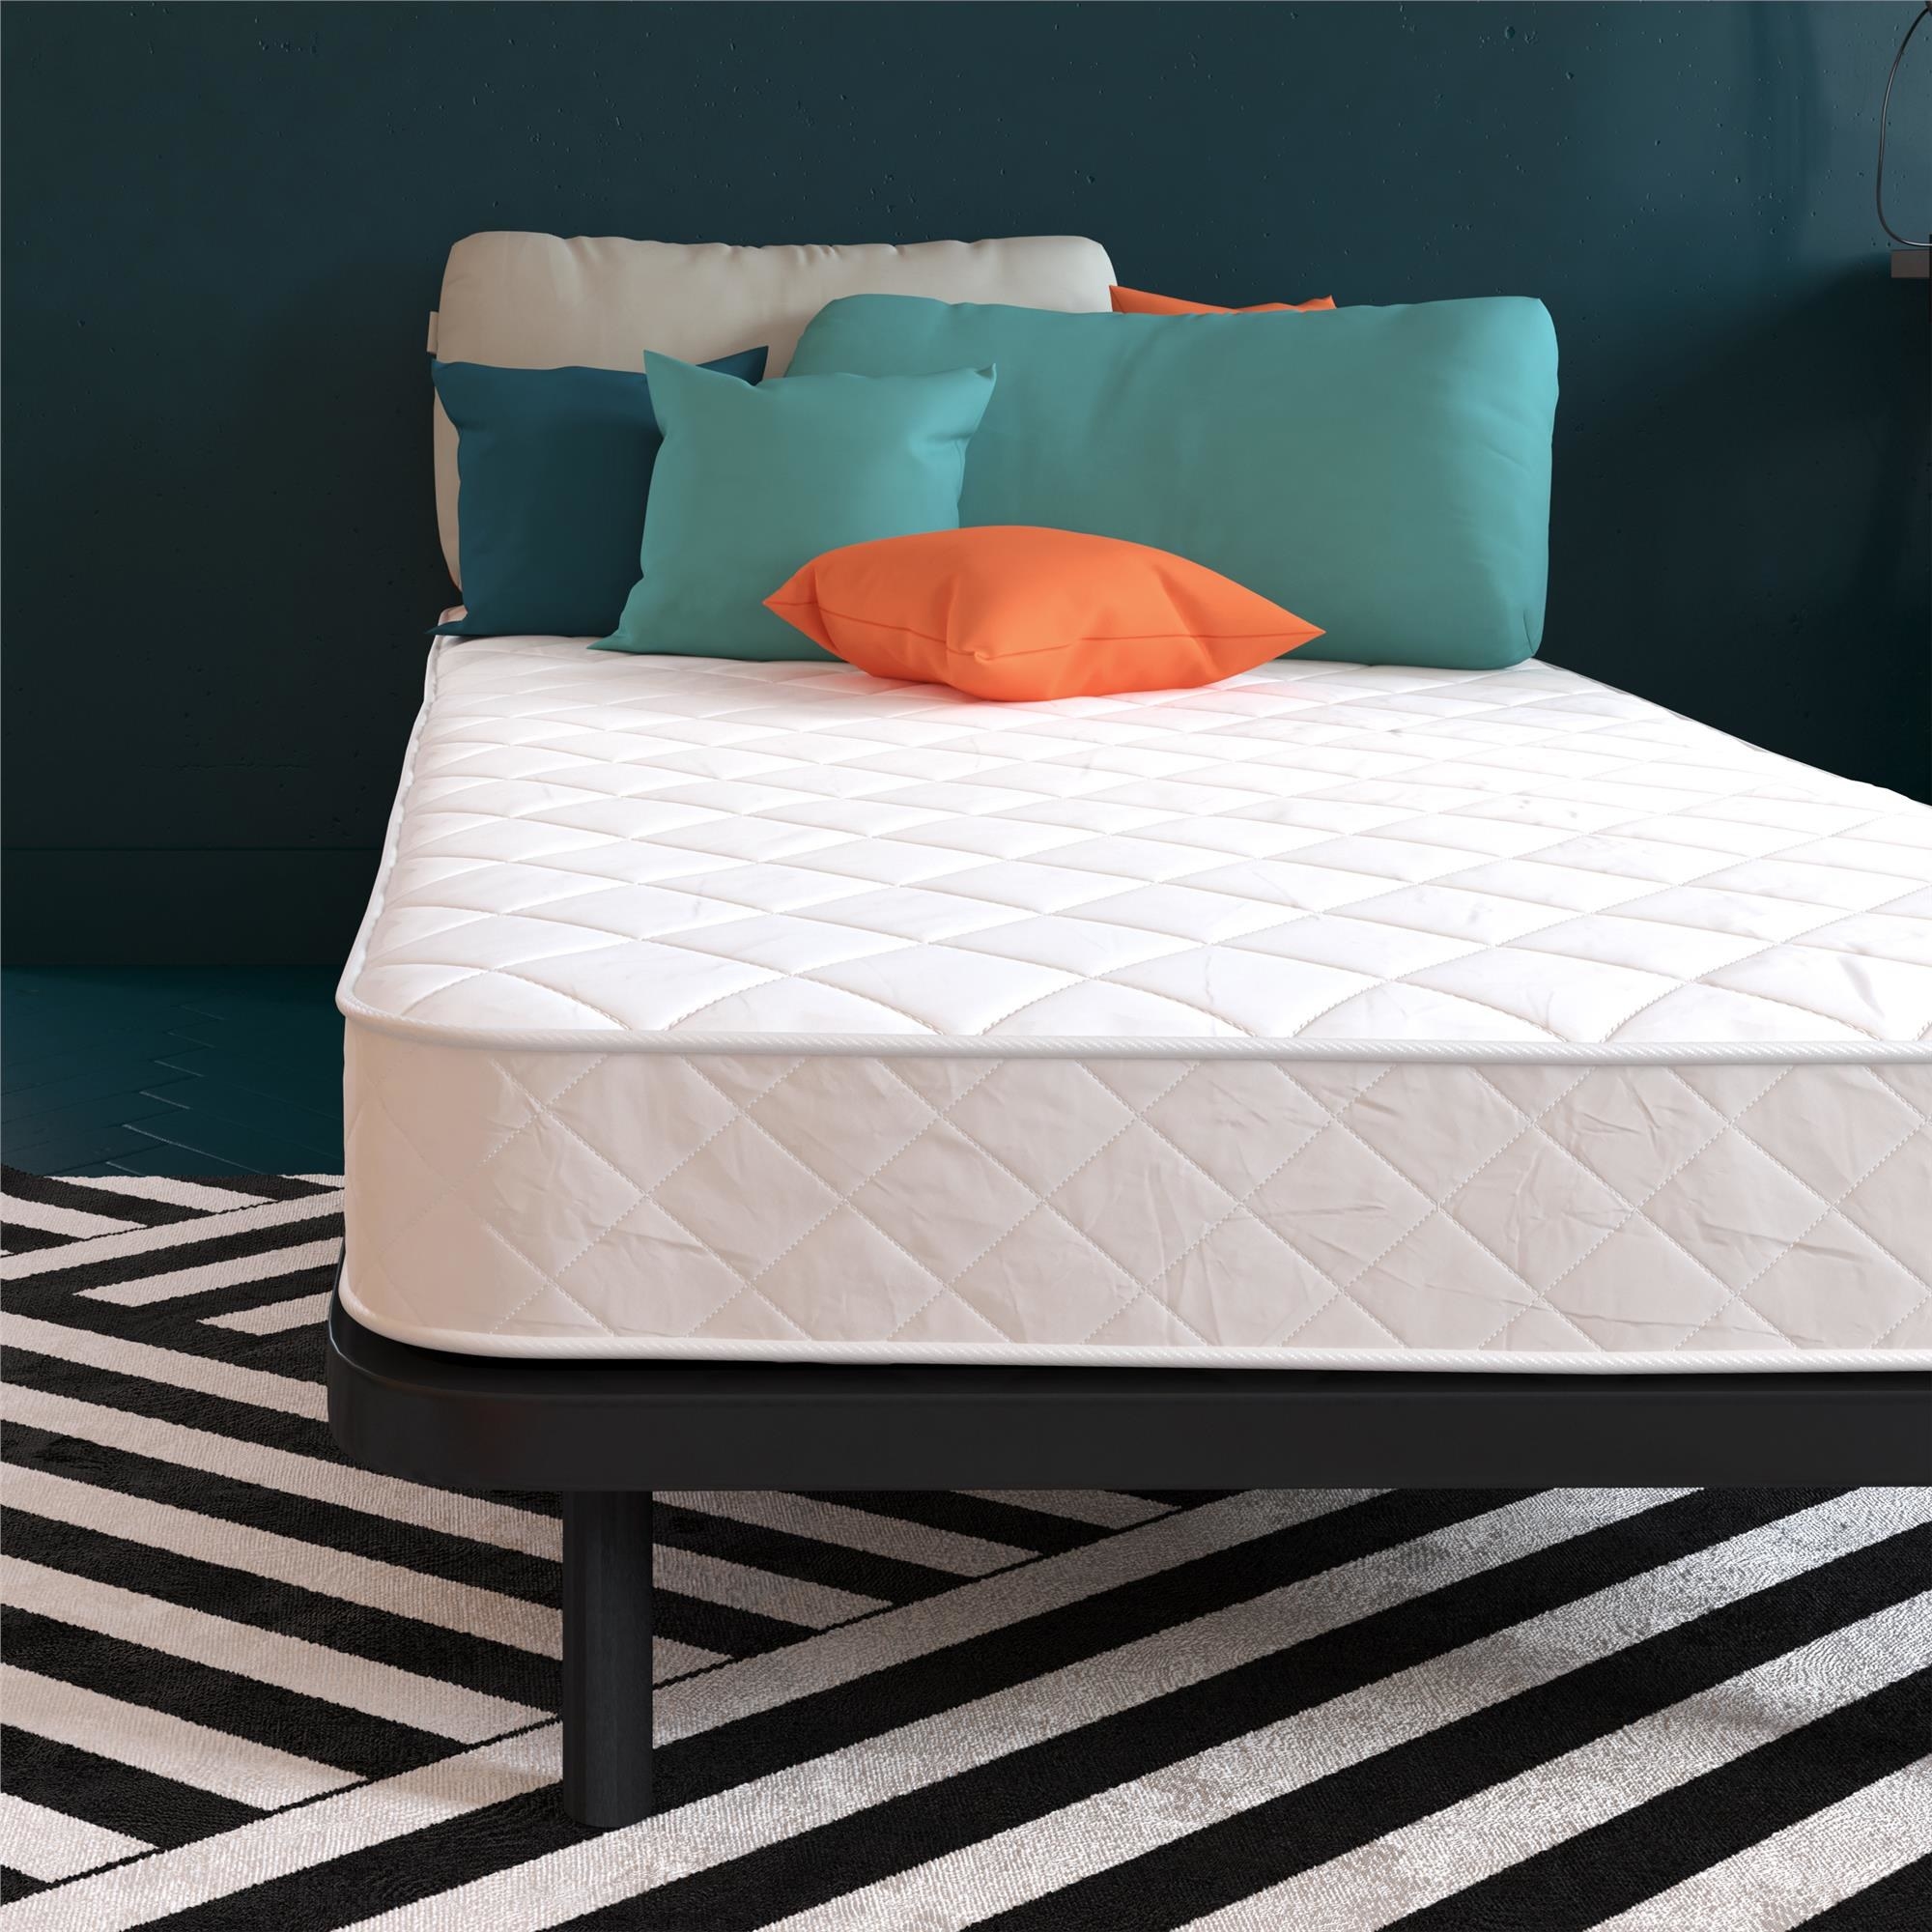 The mattress, featuring a quilted cover